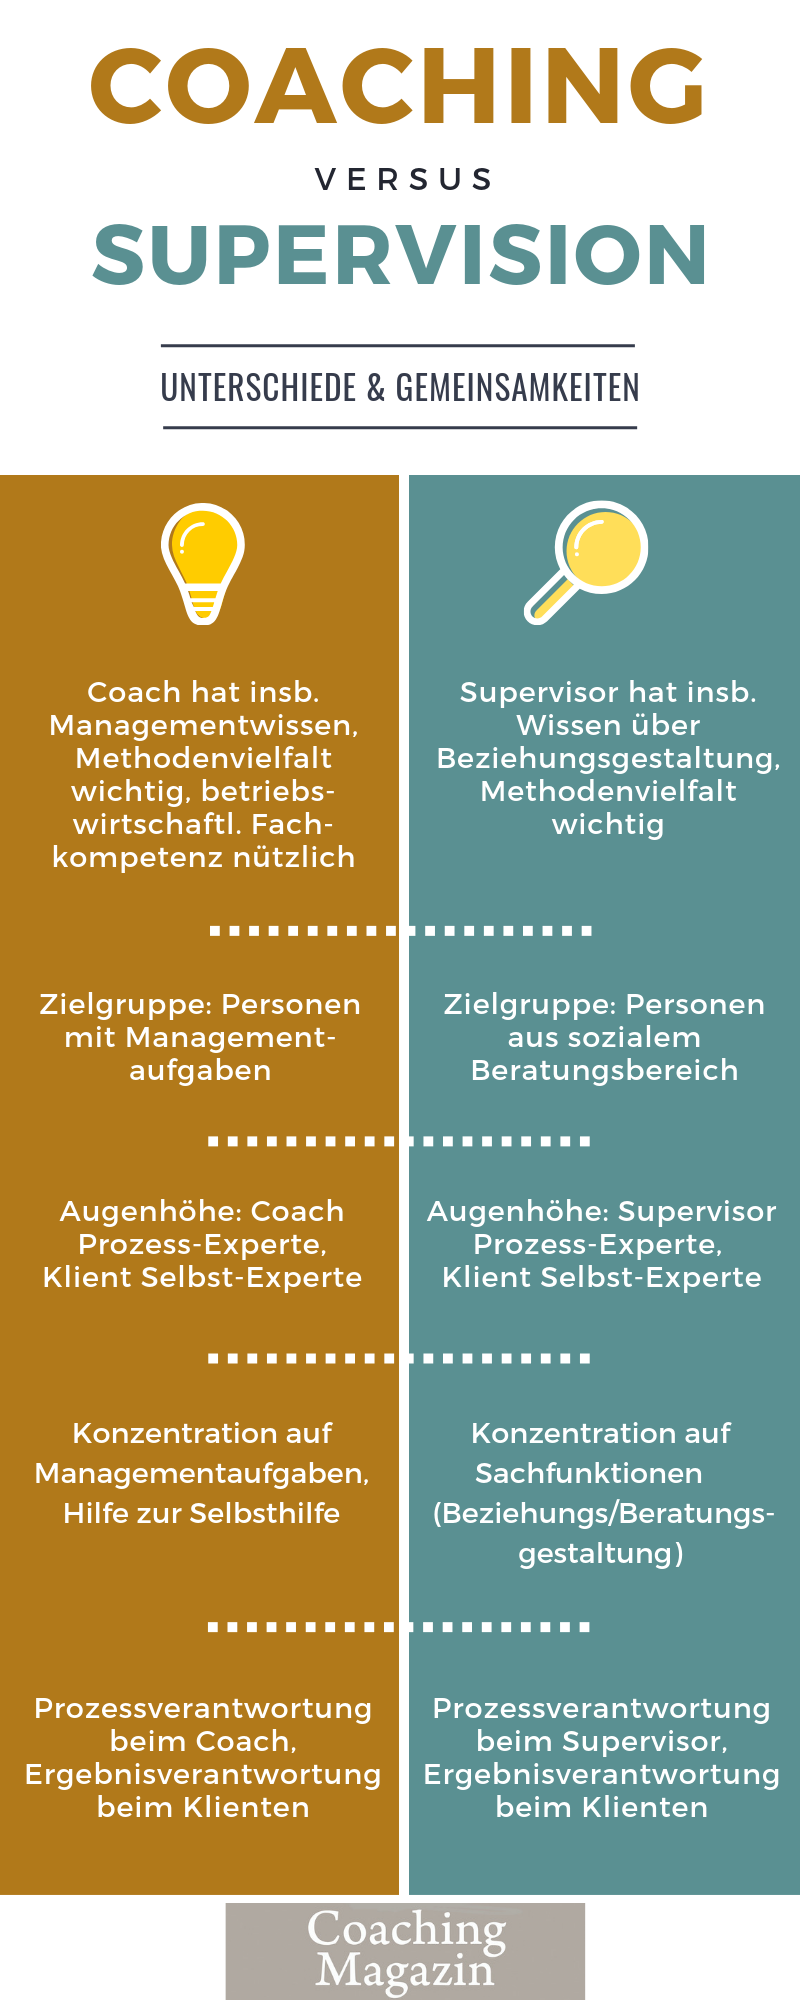 Coaching vs. Supervision